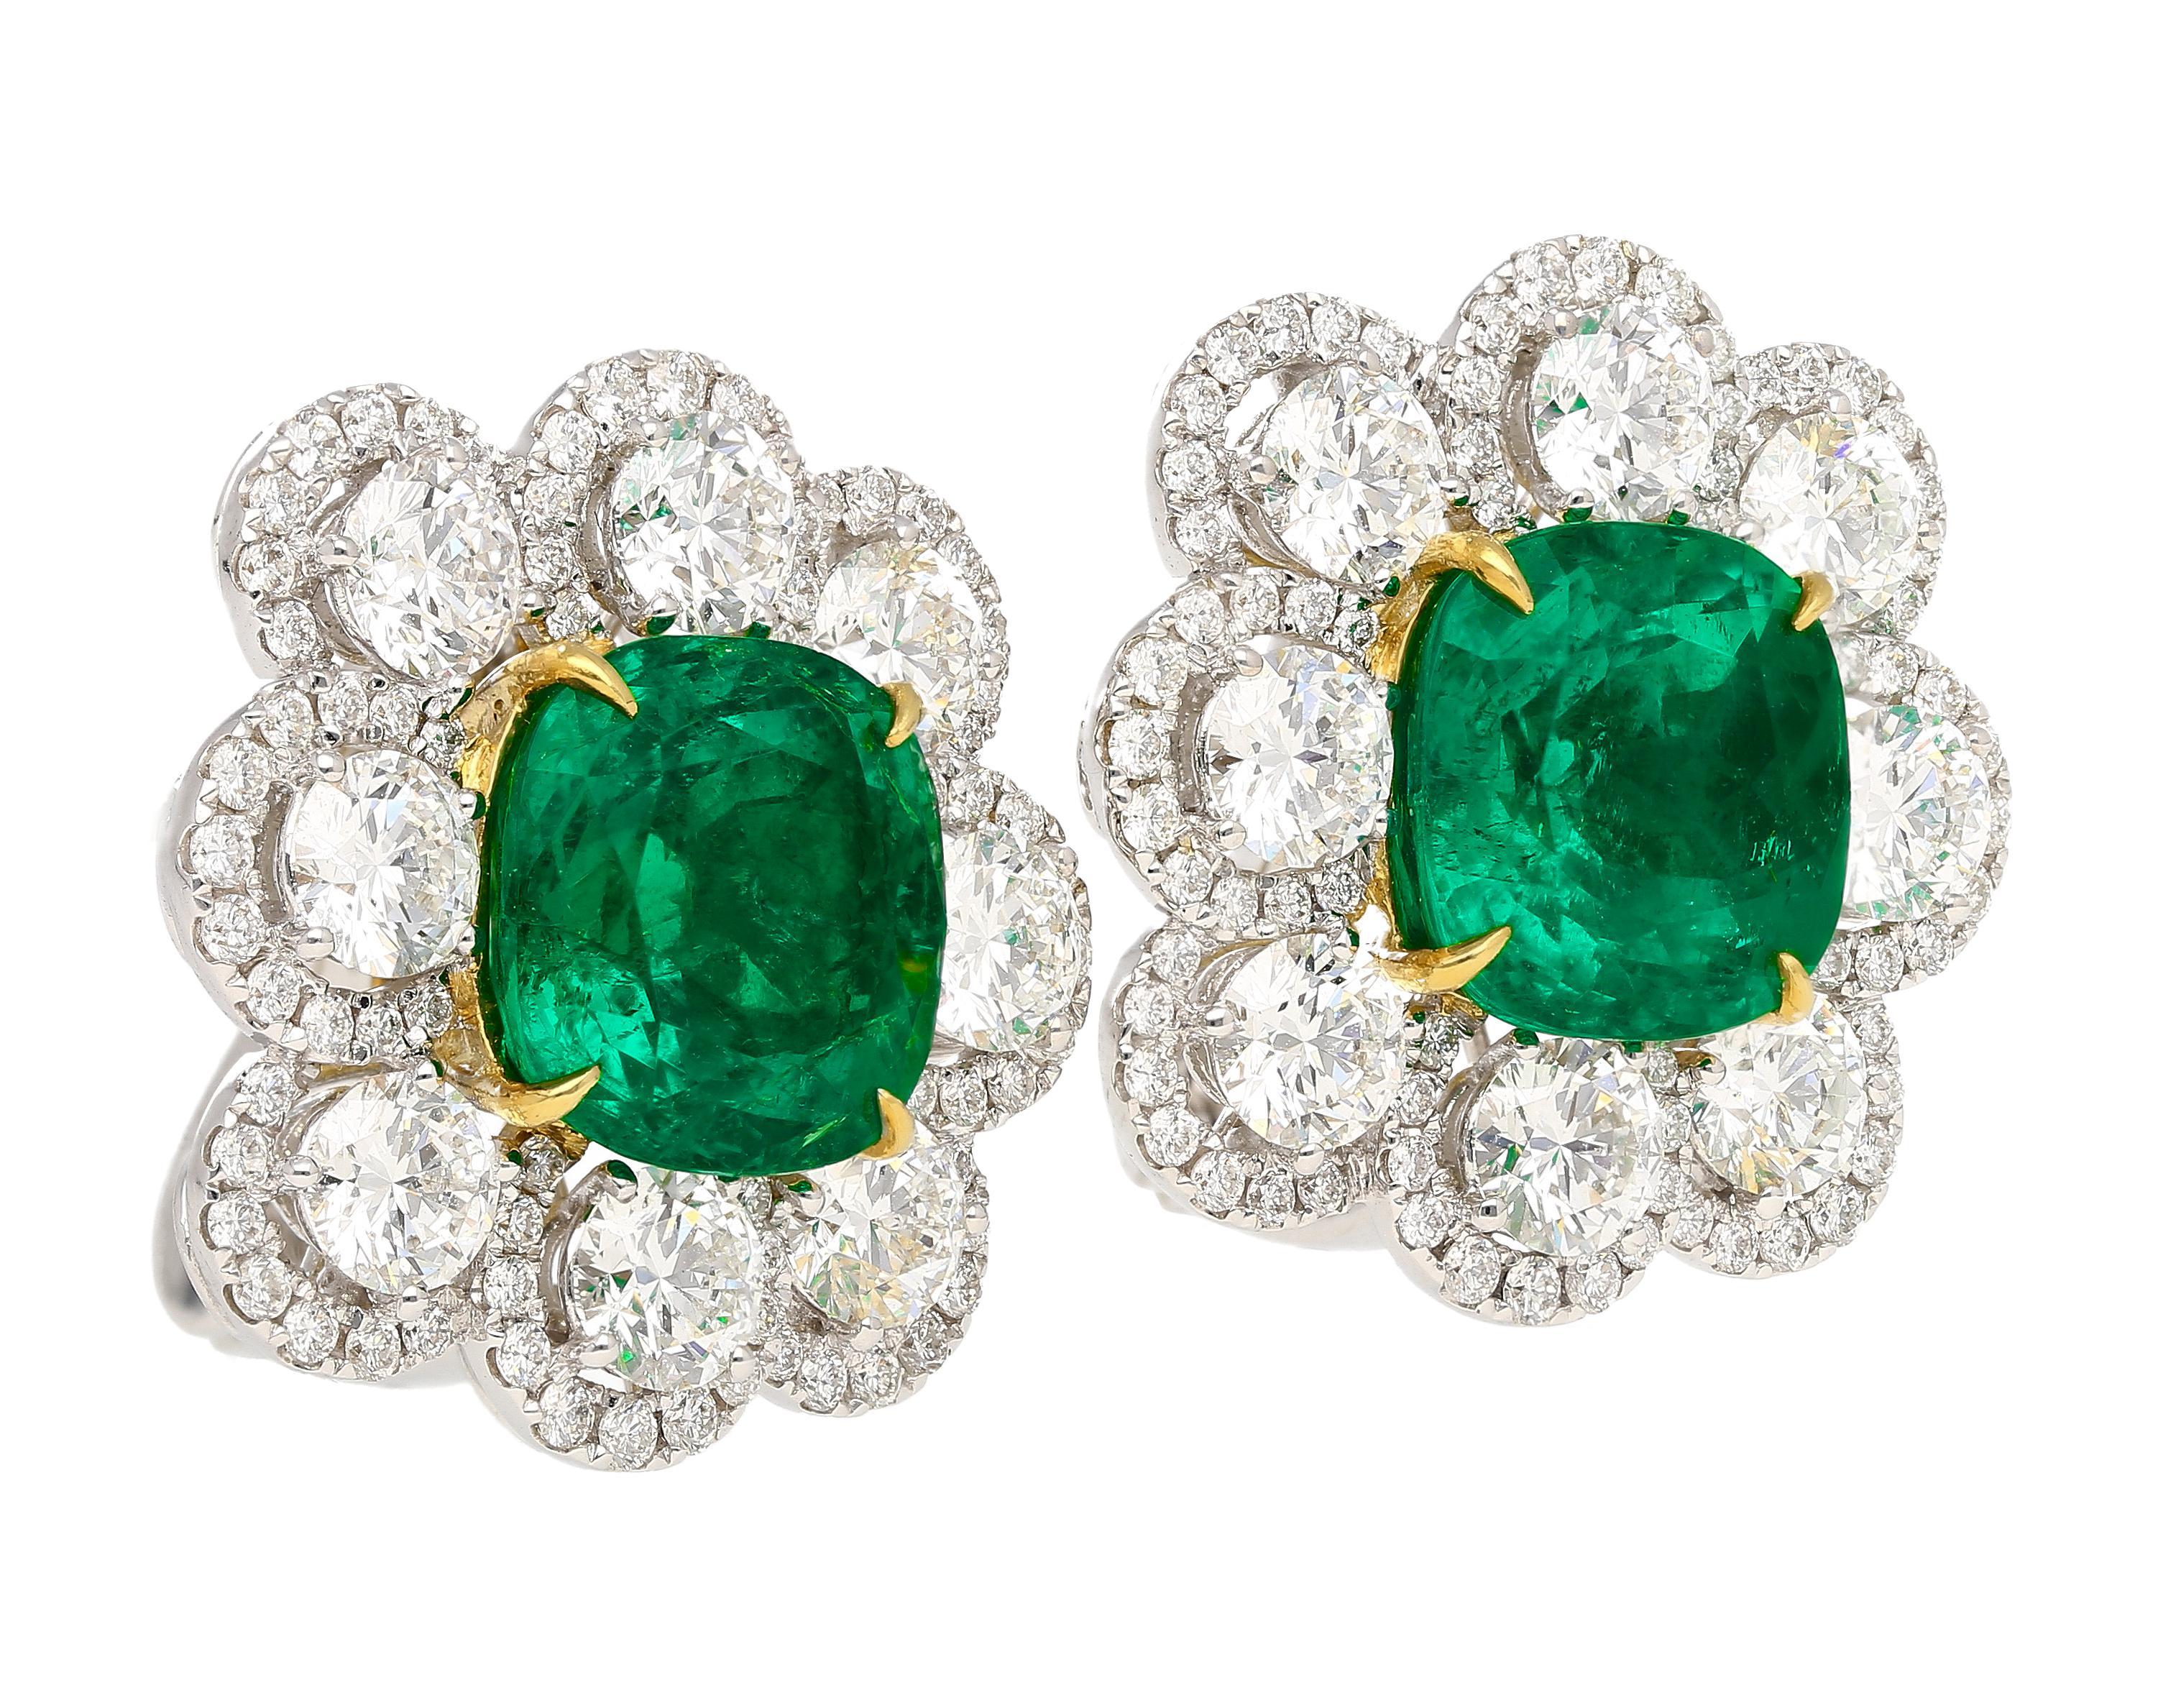 Jewelry Details:
Item Type: Earrings
Metal Type: 18K White and Yellow Gold
Weight: 14.11 grams

Center Stone Details:
Gemstone Type: Colombian Emerald
Carat: 4.81 carats and 4.51 carats
Cut: Cushion Cut
Color: Vivid Green
Oil Treatment: